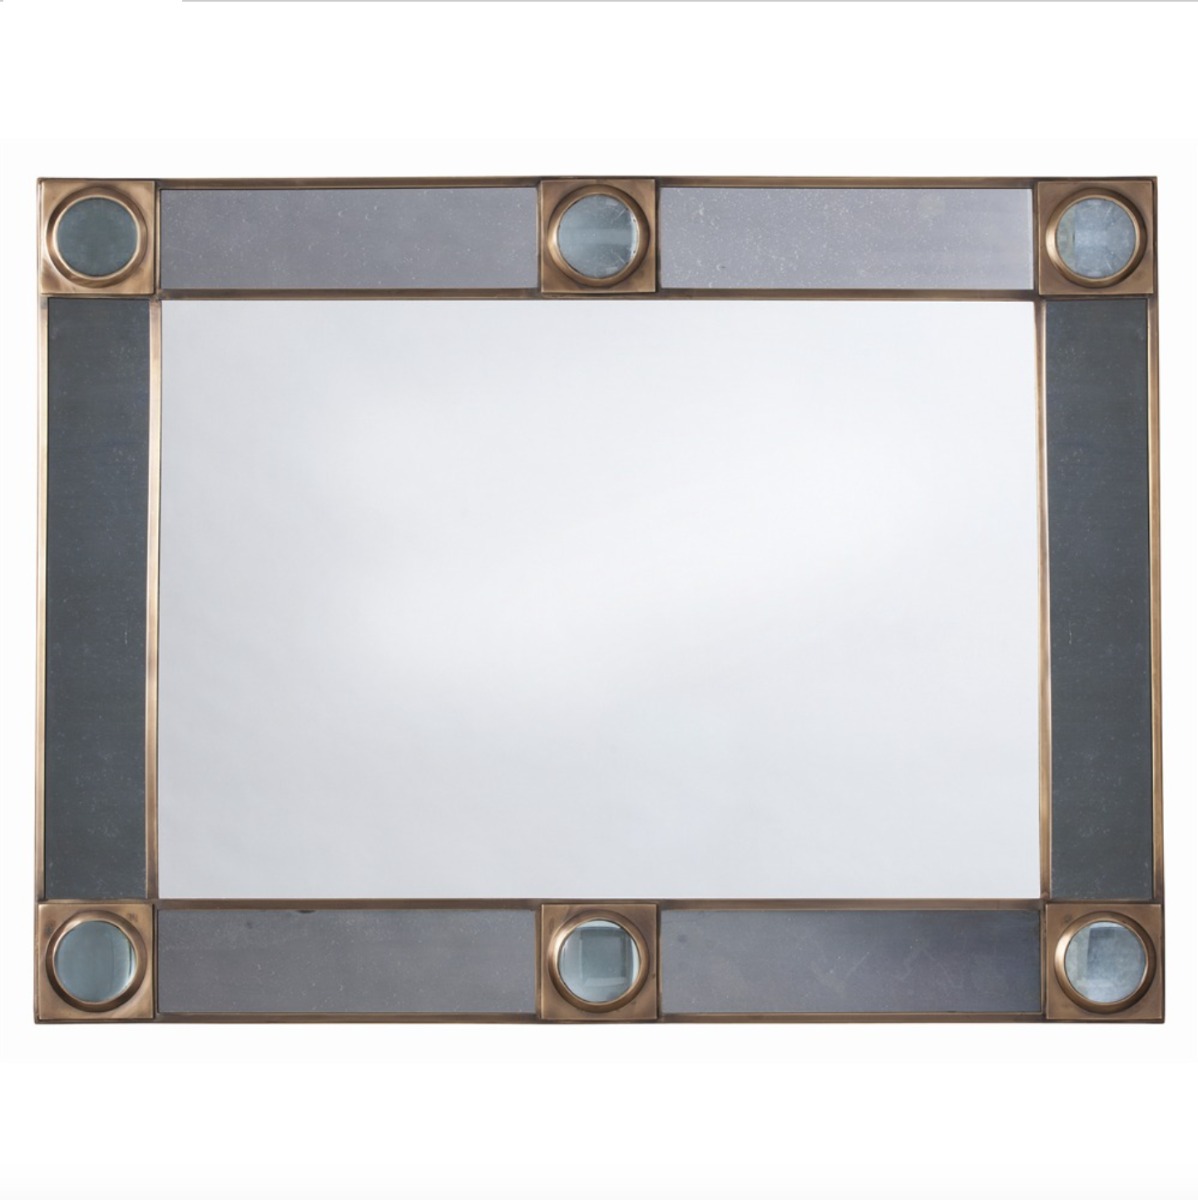 Designer Home luxury mirror with an industrial style with glass detailing at Luxuria London